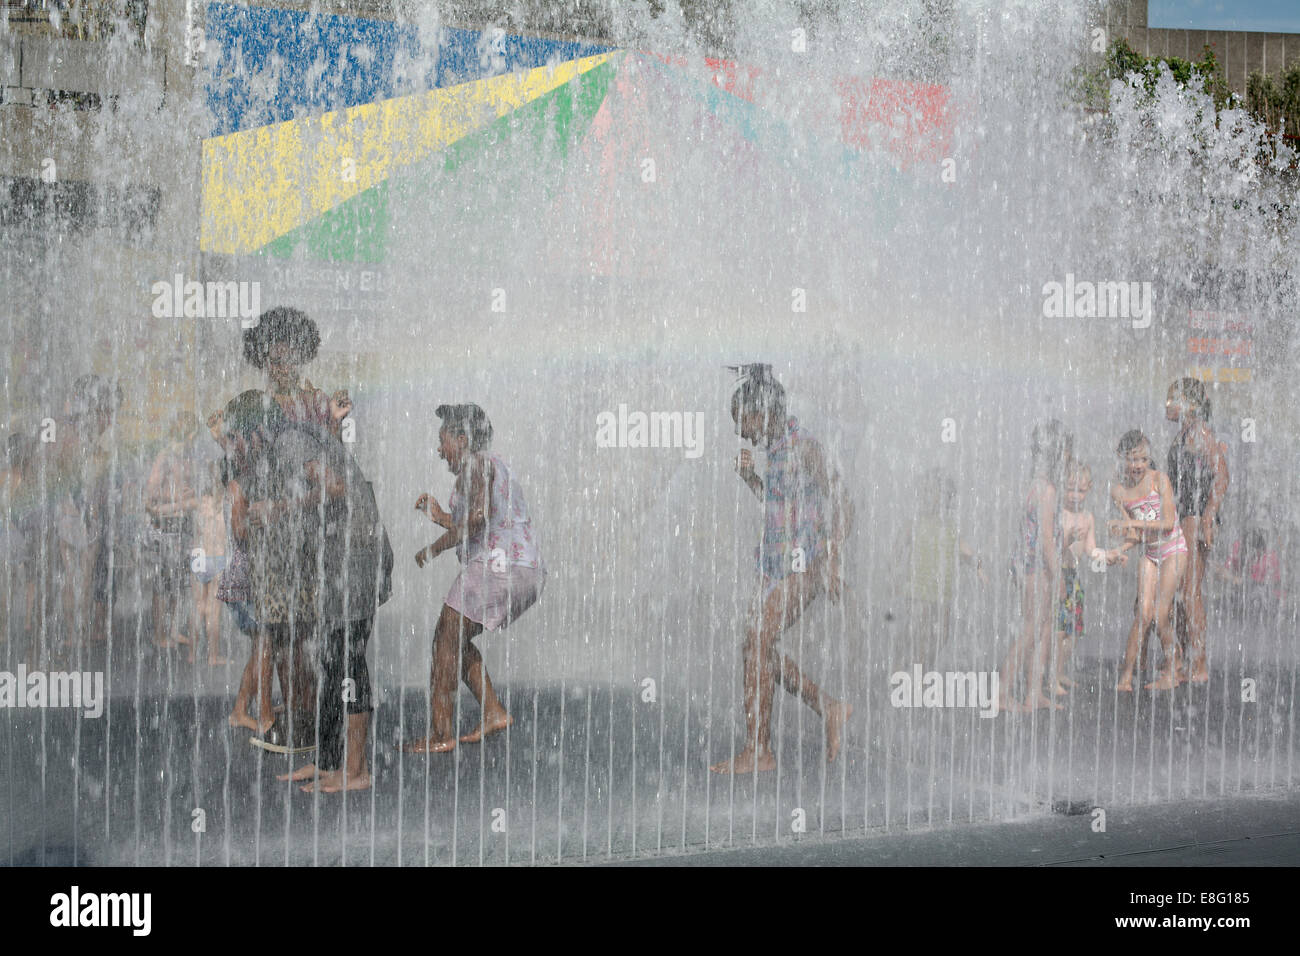 Children playing and getting wet seen through the fountain on South Bank London Stock Photo